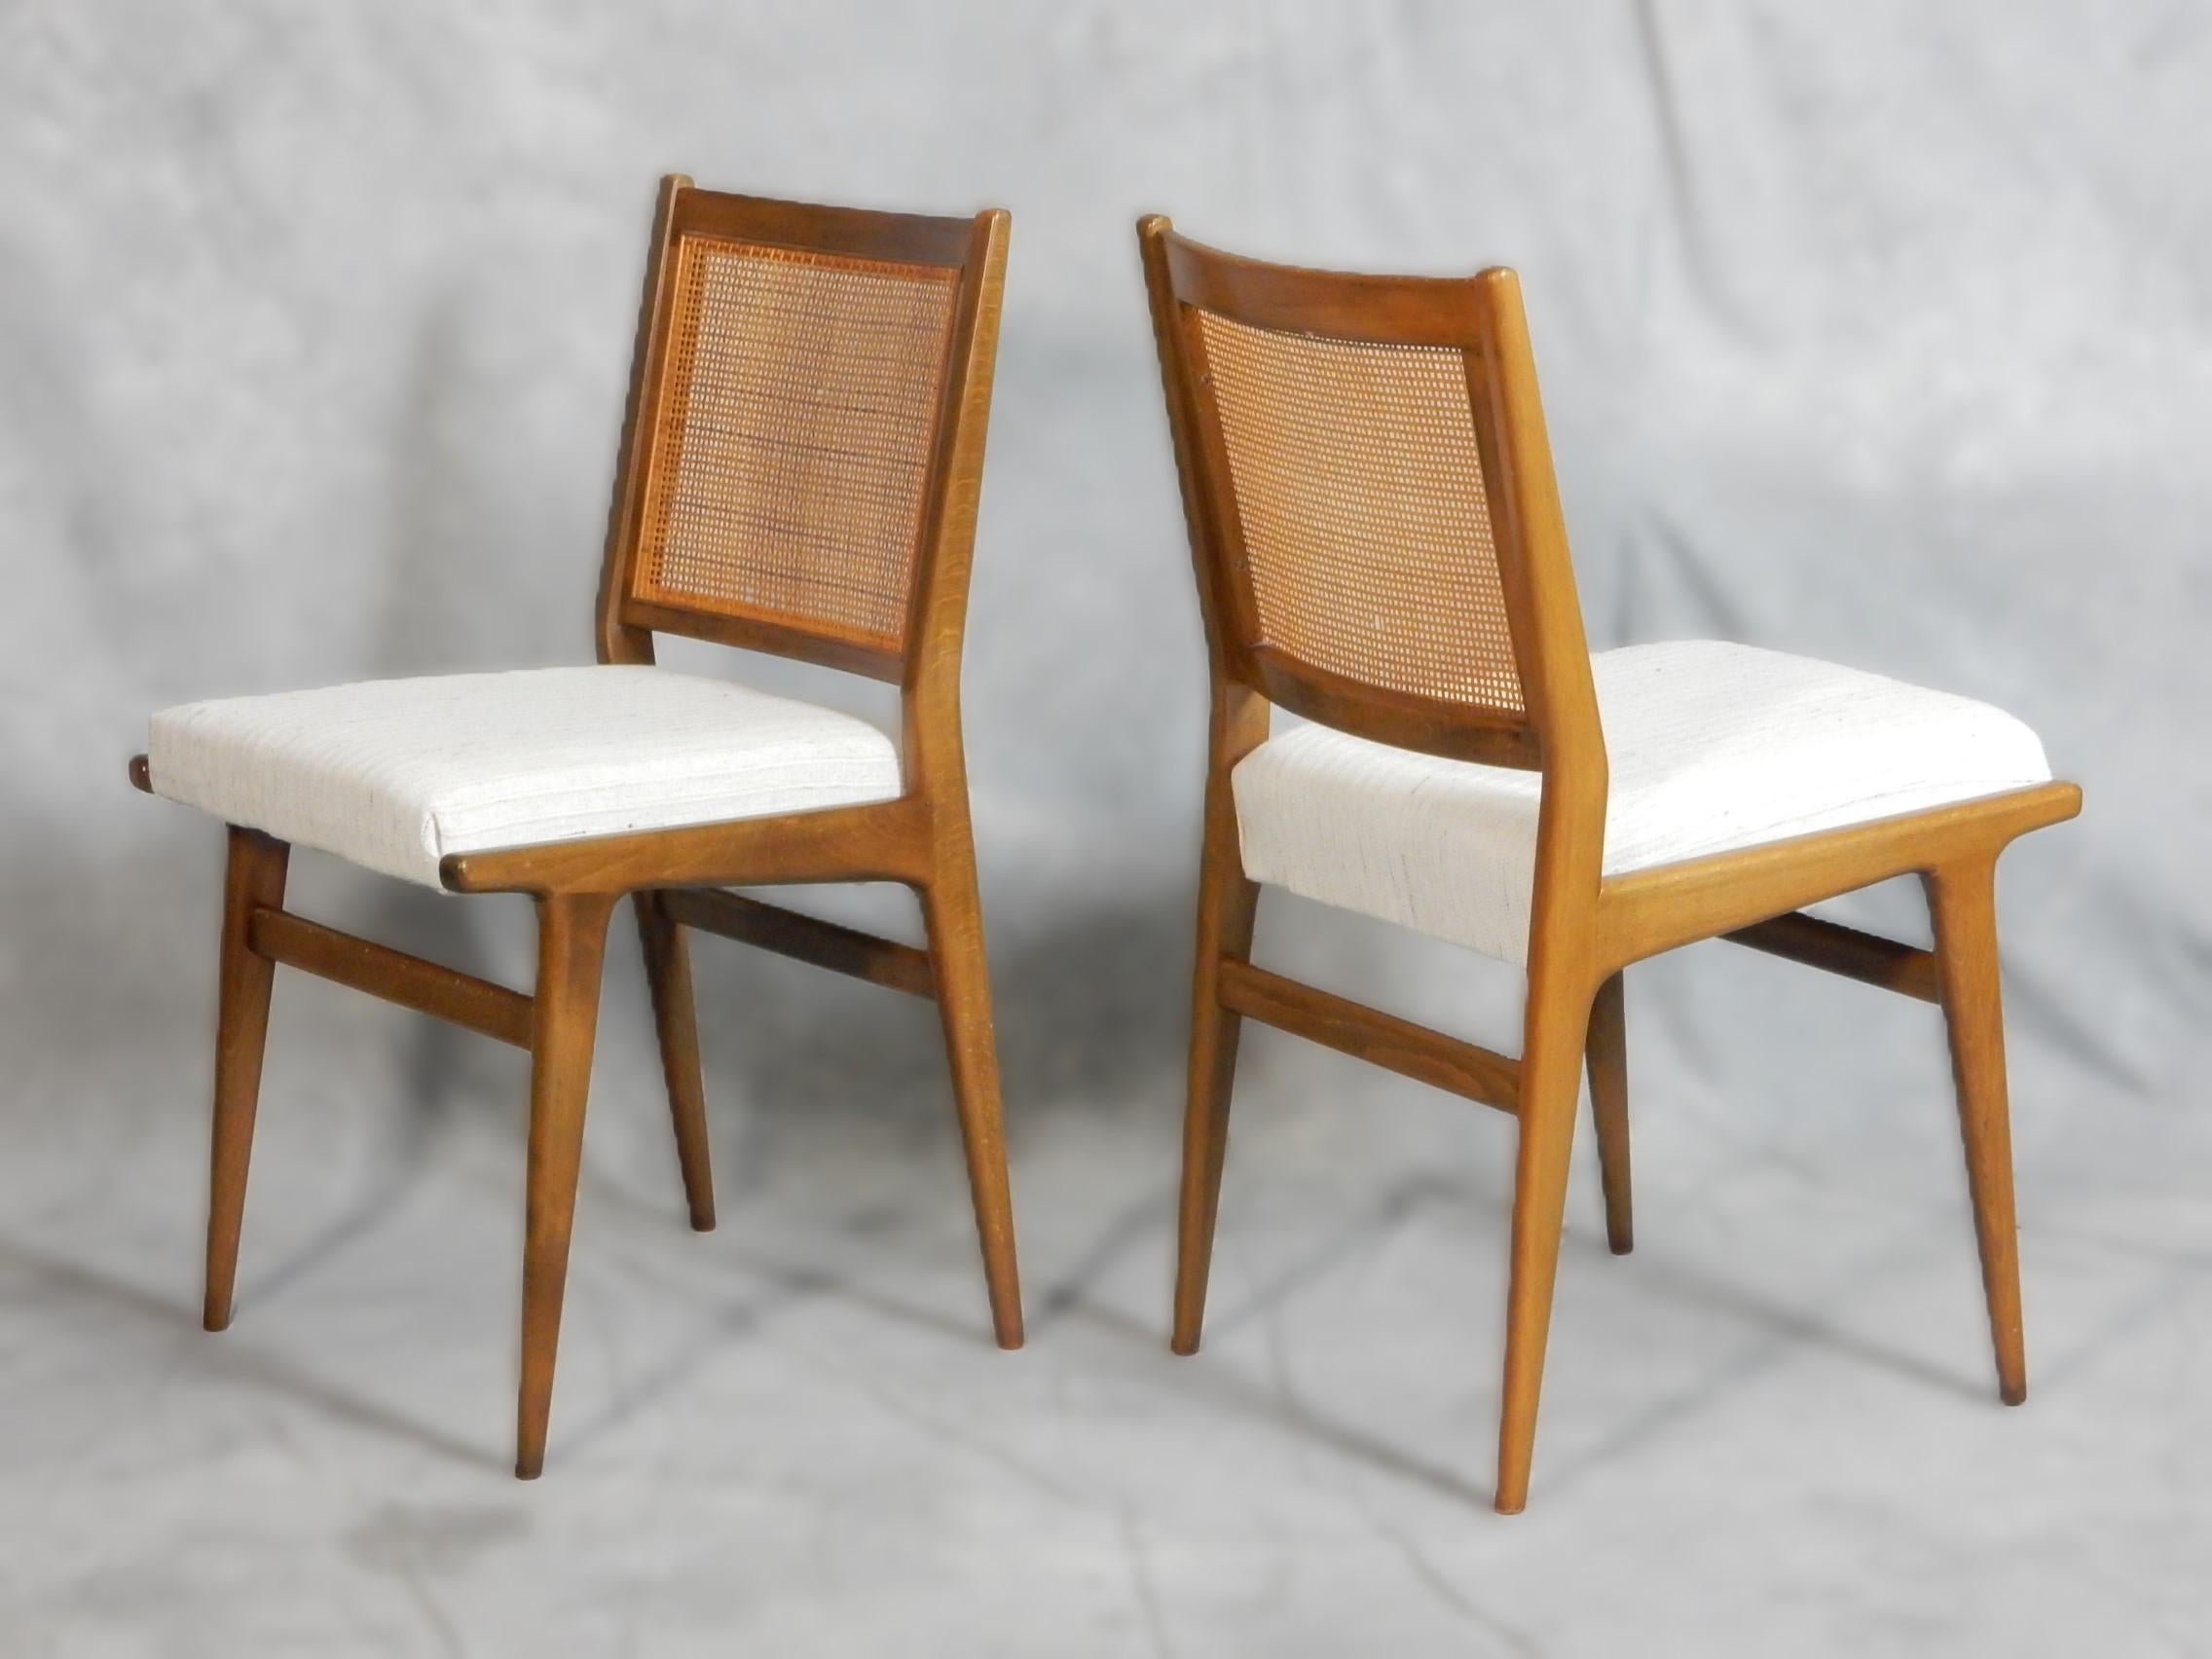 Swedish 1950's Jens Risom design Cane Back Dining Chairs by J.O. Carlssons Möbelindustri For Sale